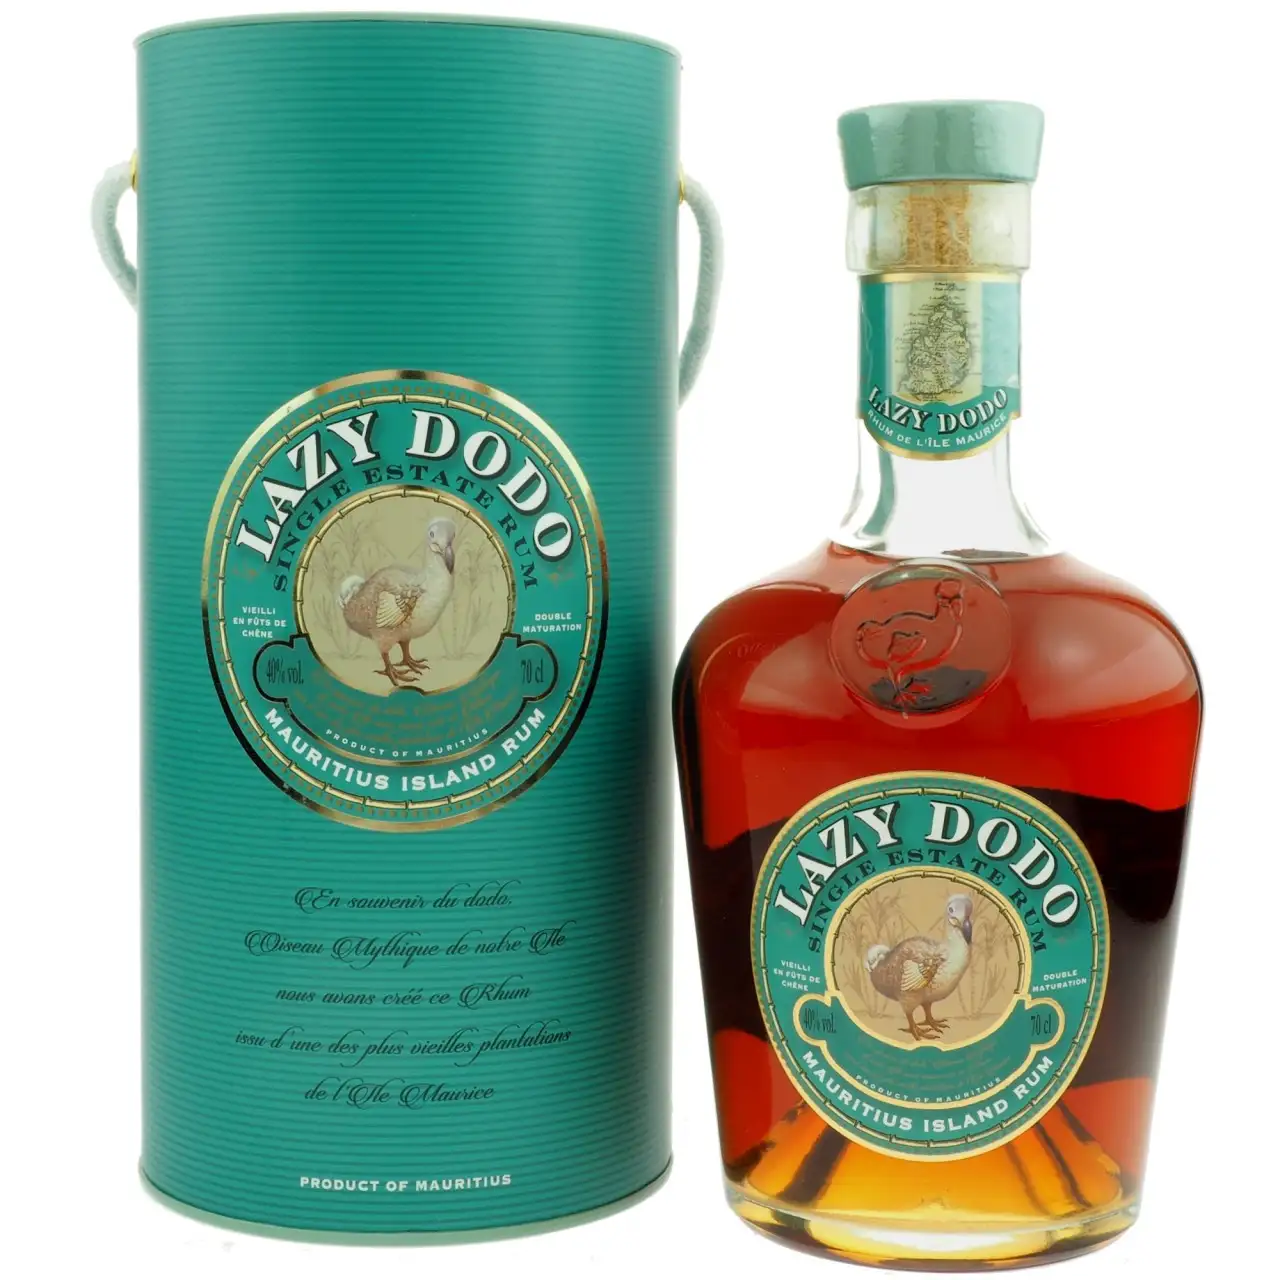 Image of the front of the bottle of the rum Lazy Dodo Single Estate